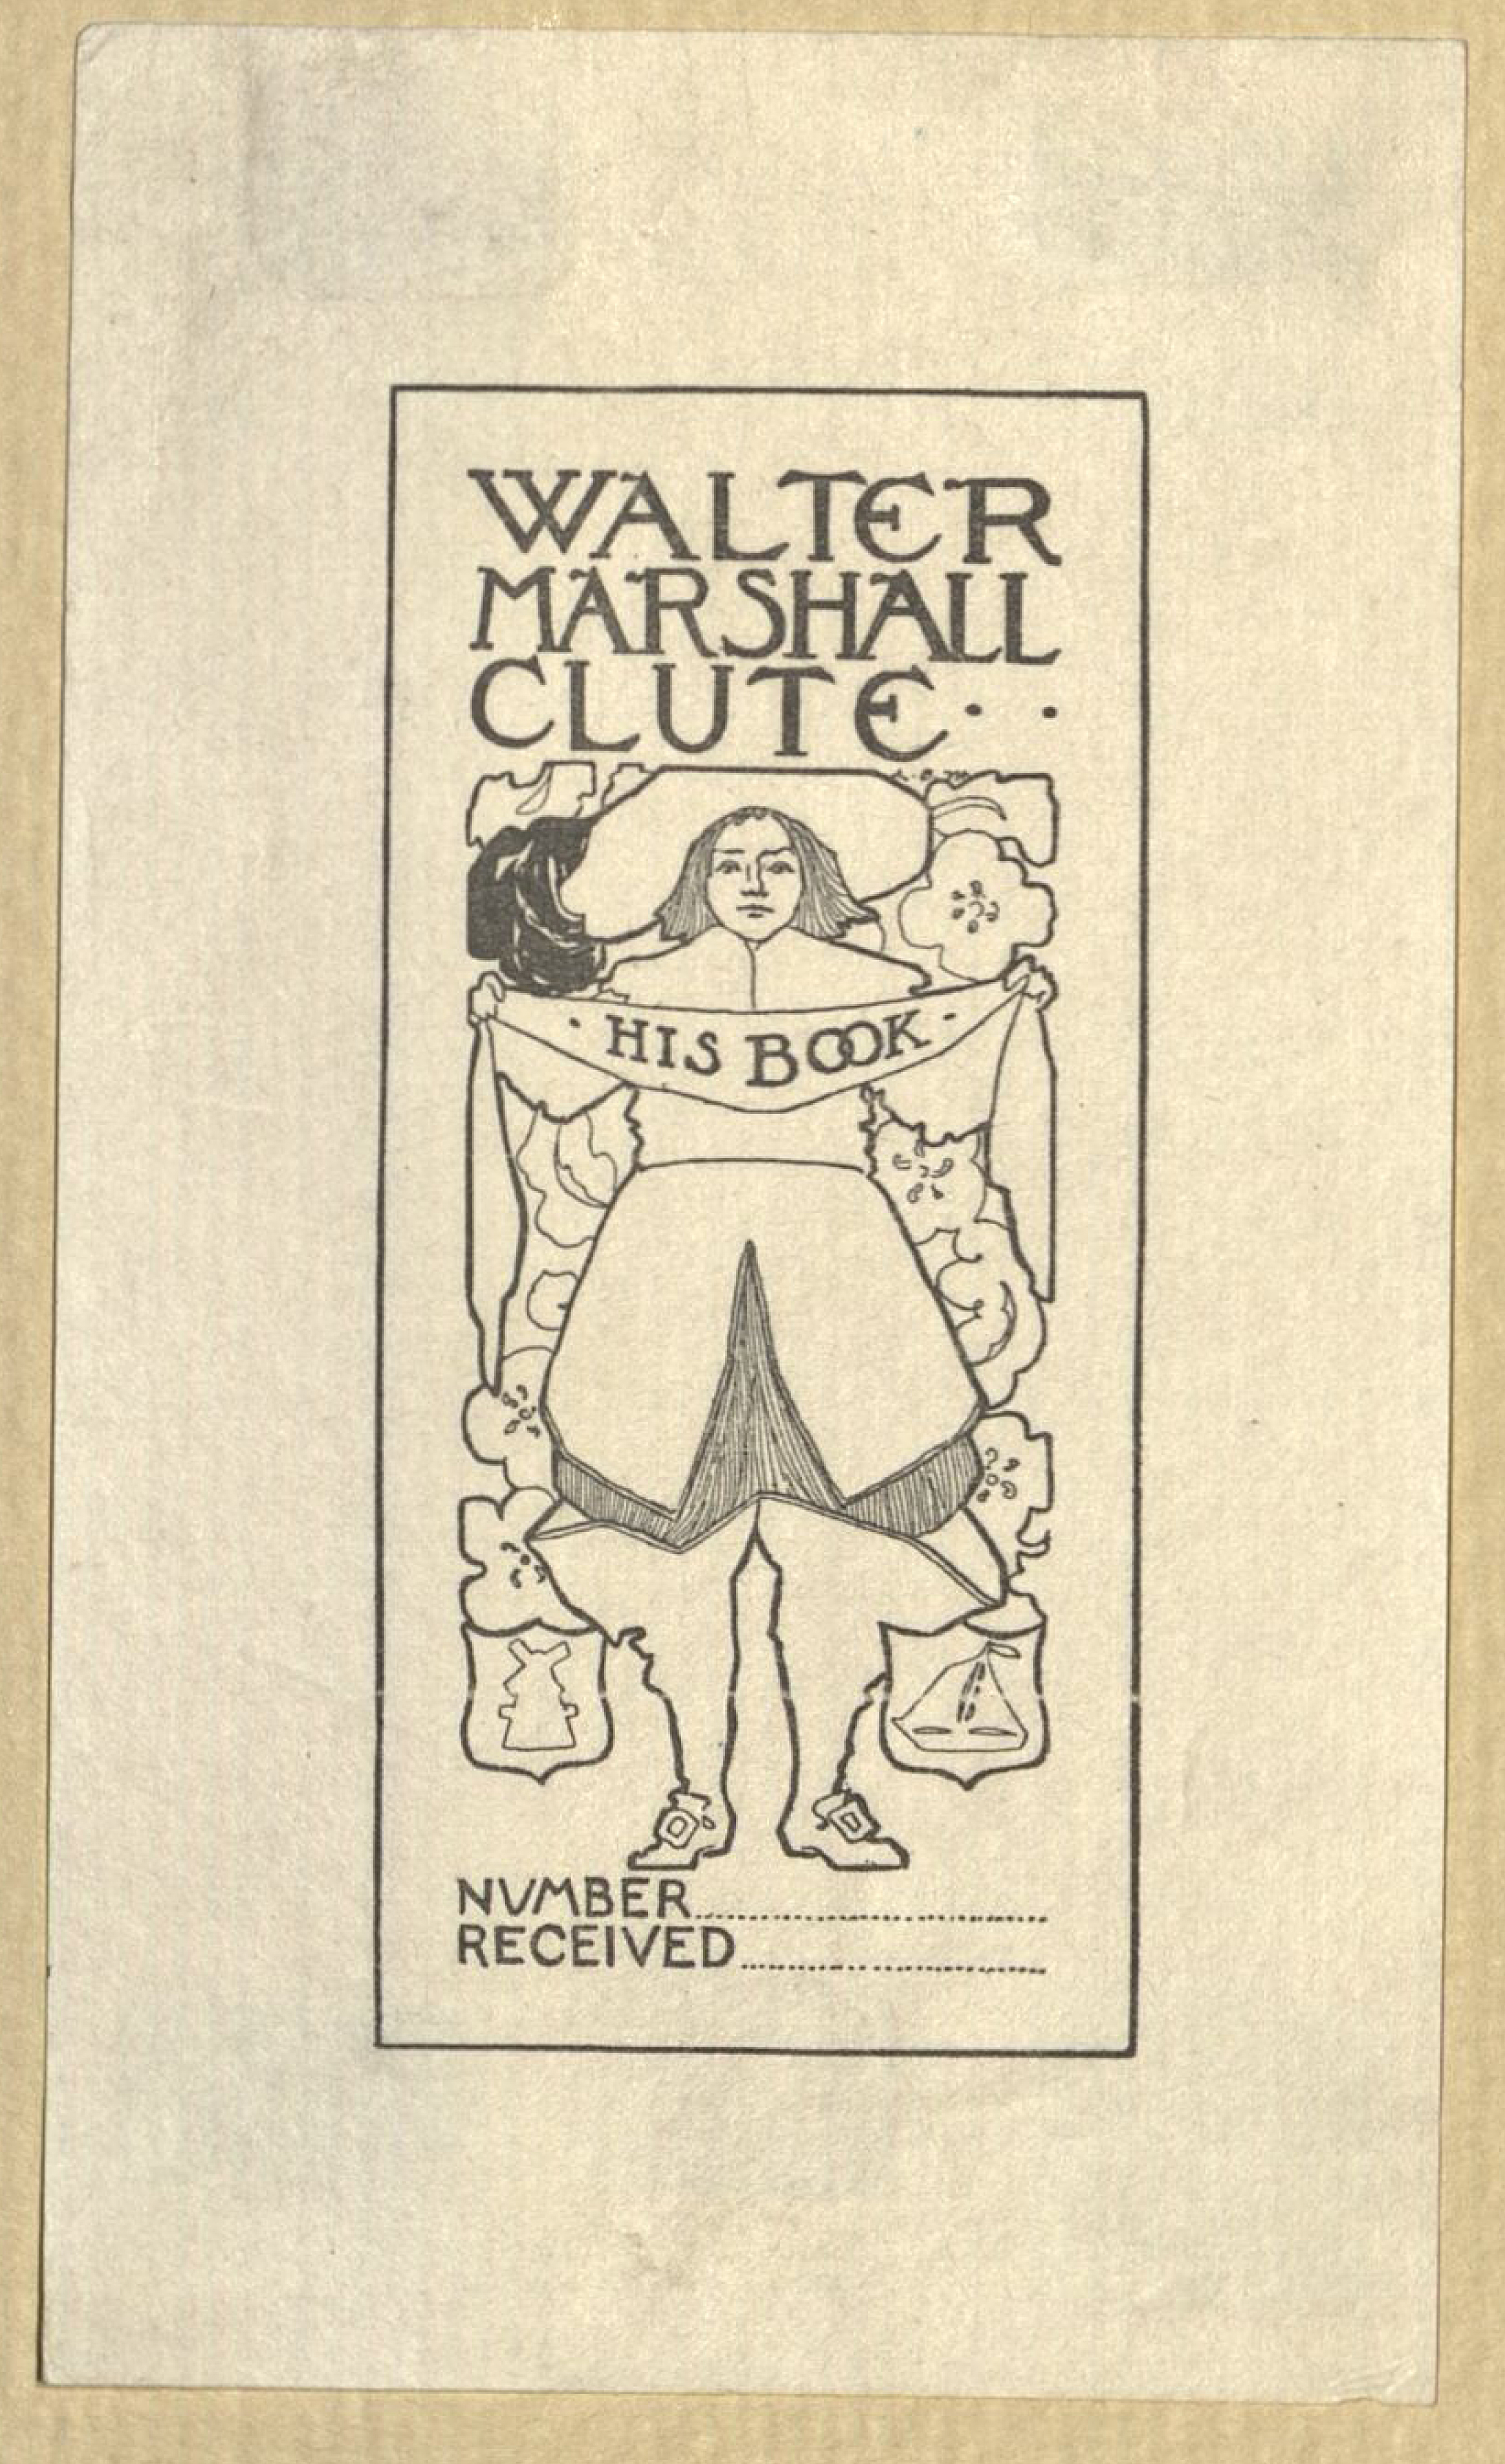 Bookplate of Walter Marshall Clute